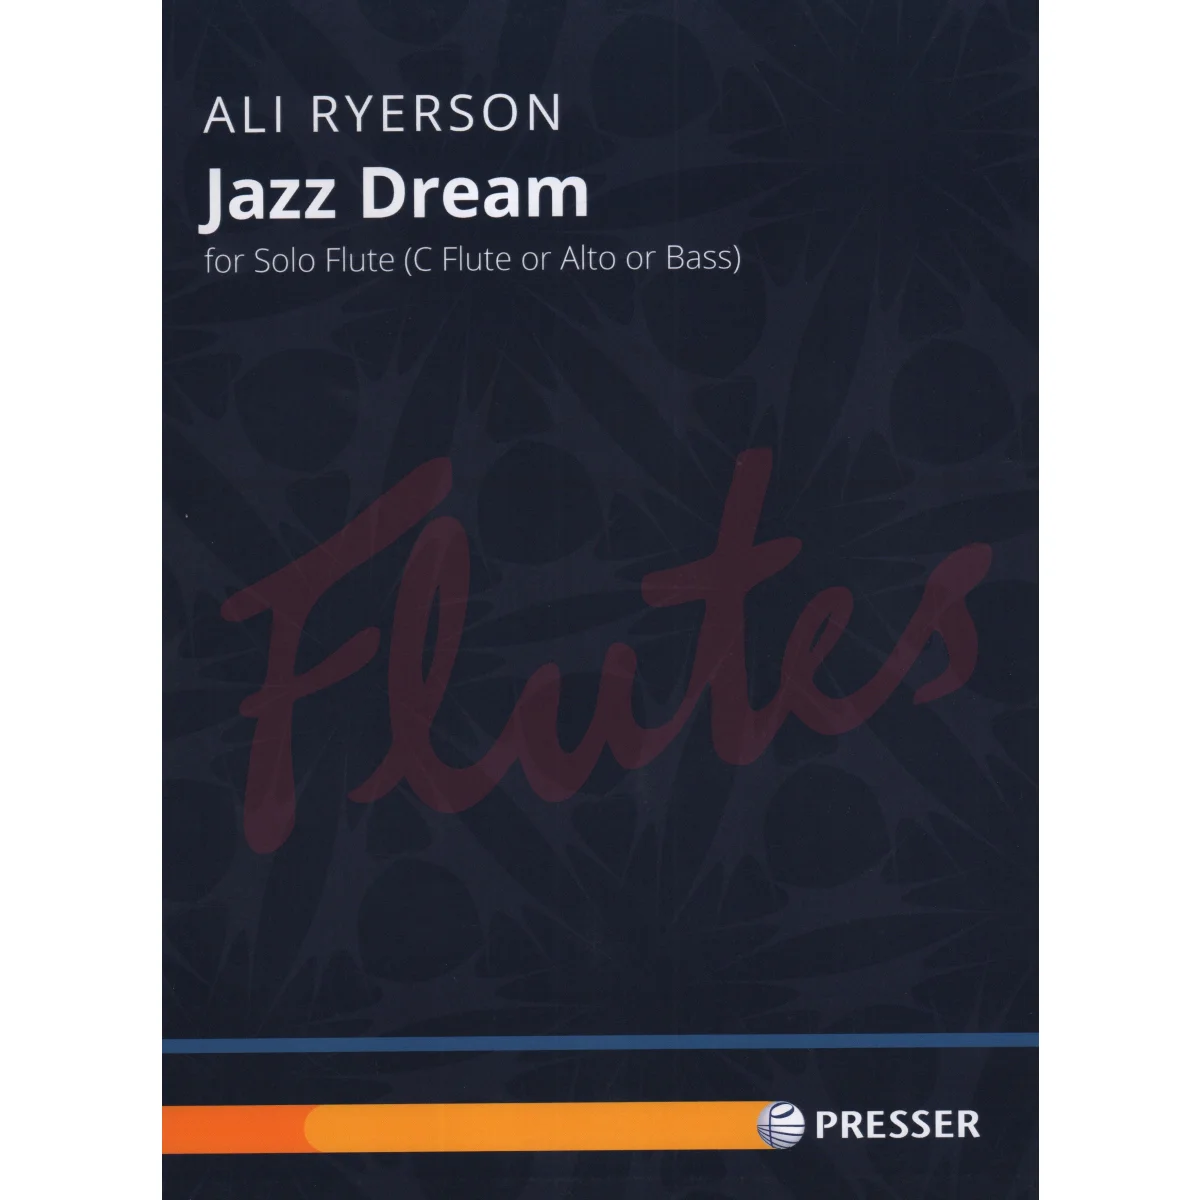 Jazz Dream for Solo Flute (C Flute or Alto or Bass)